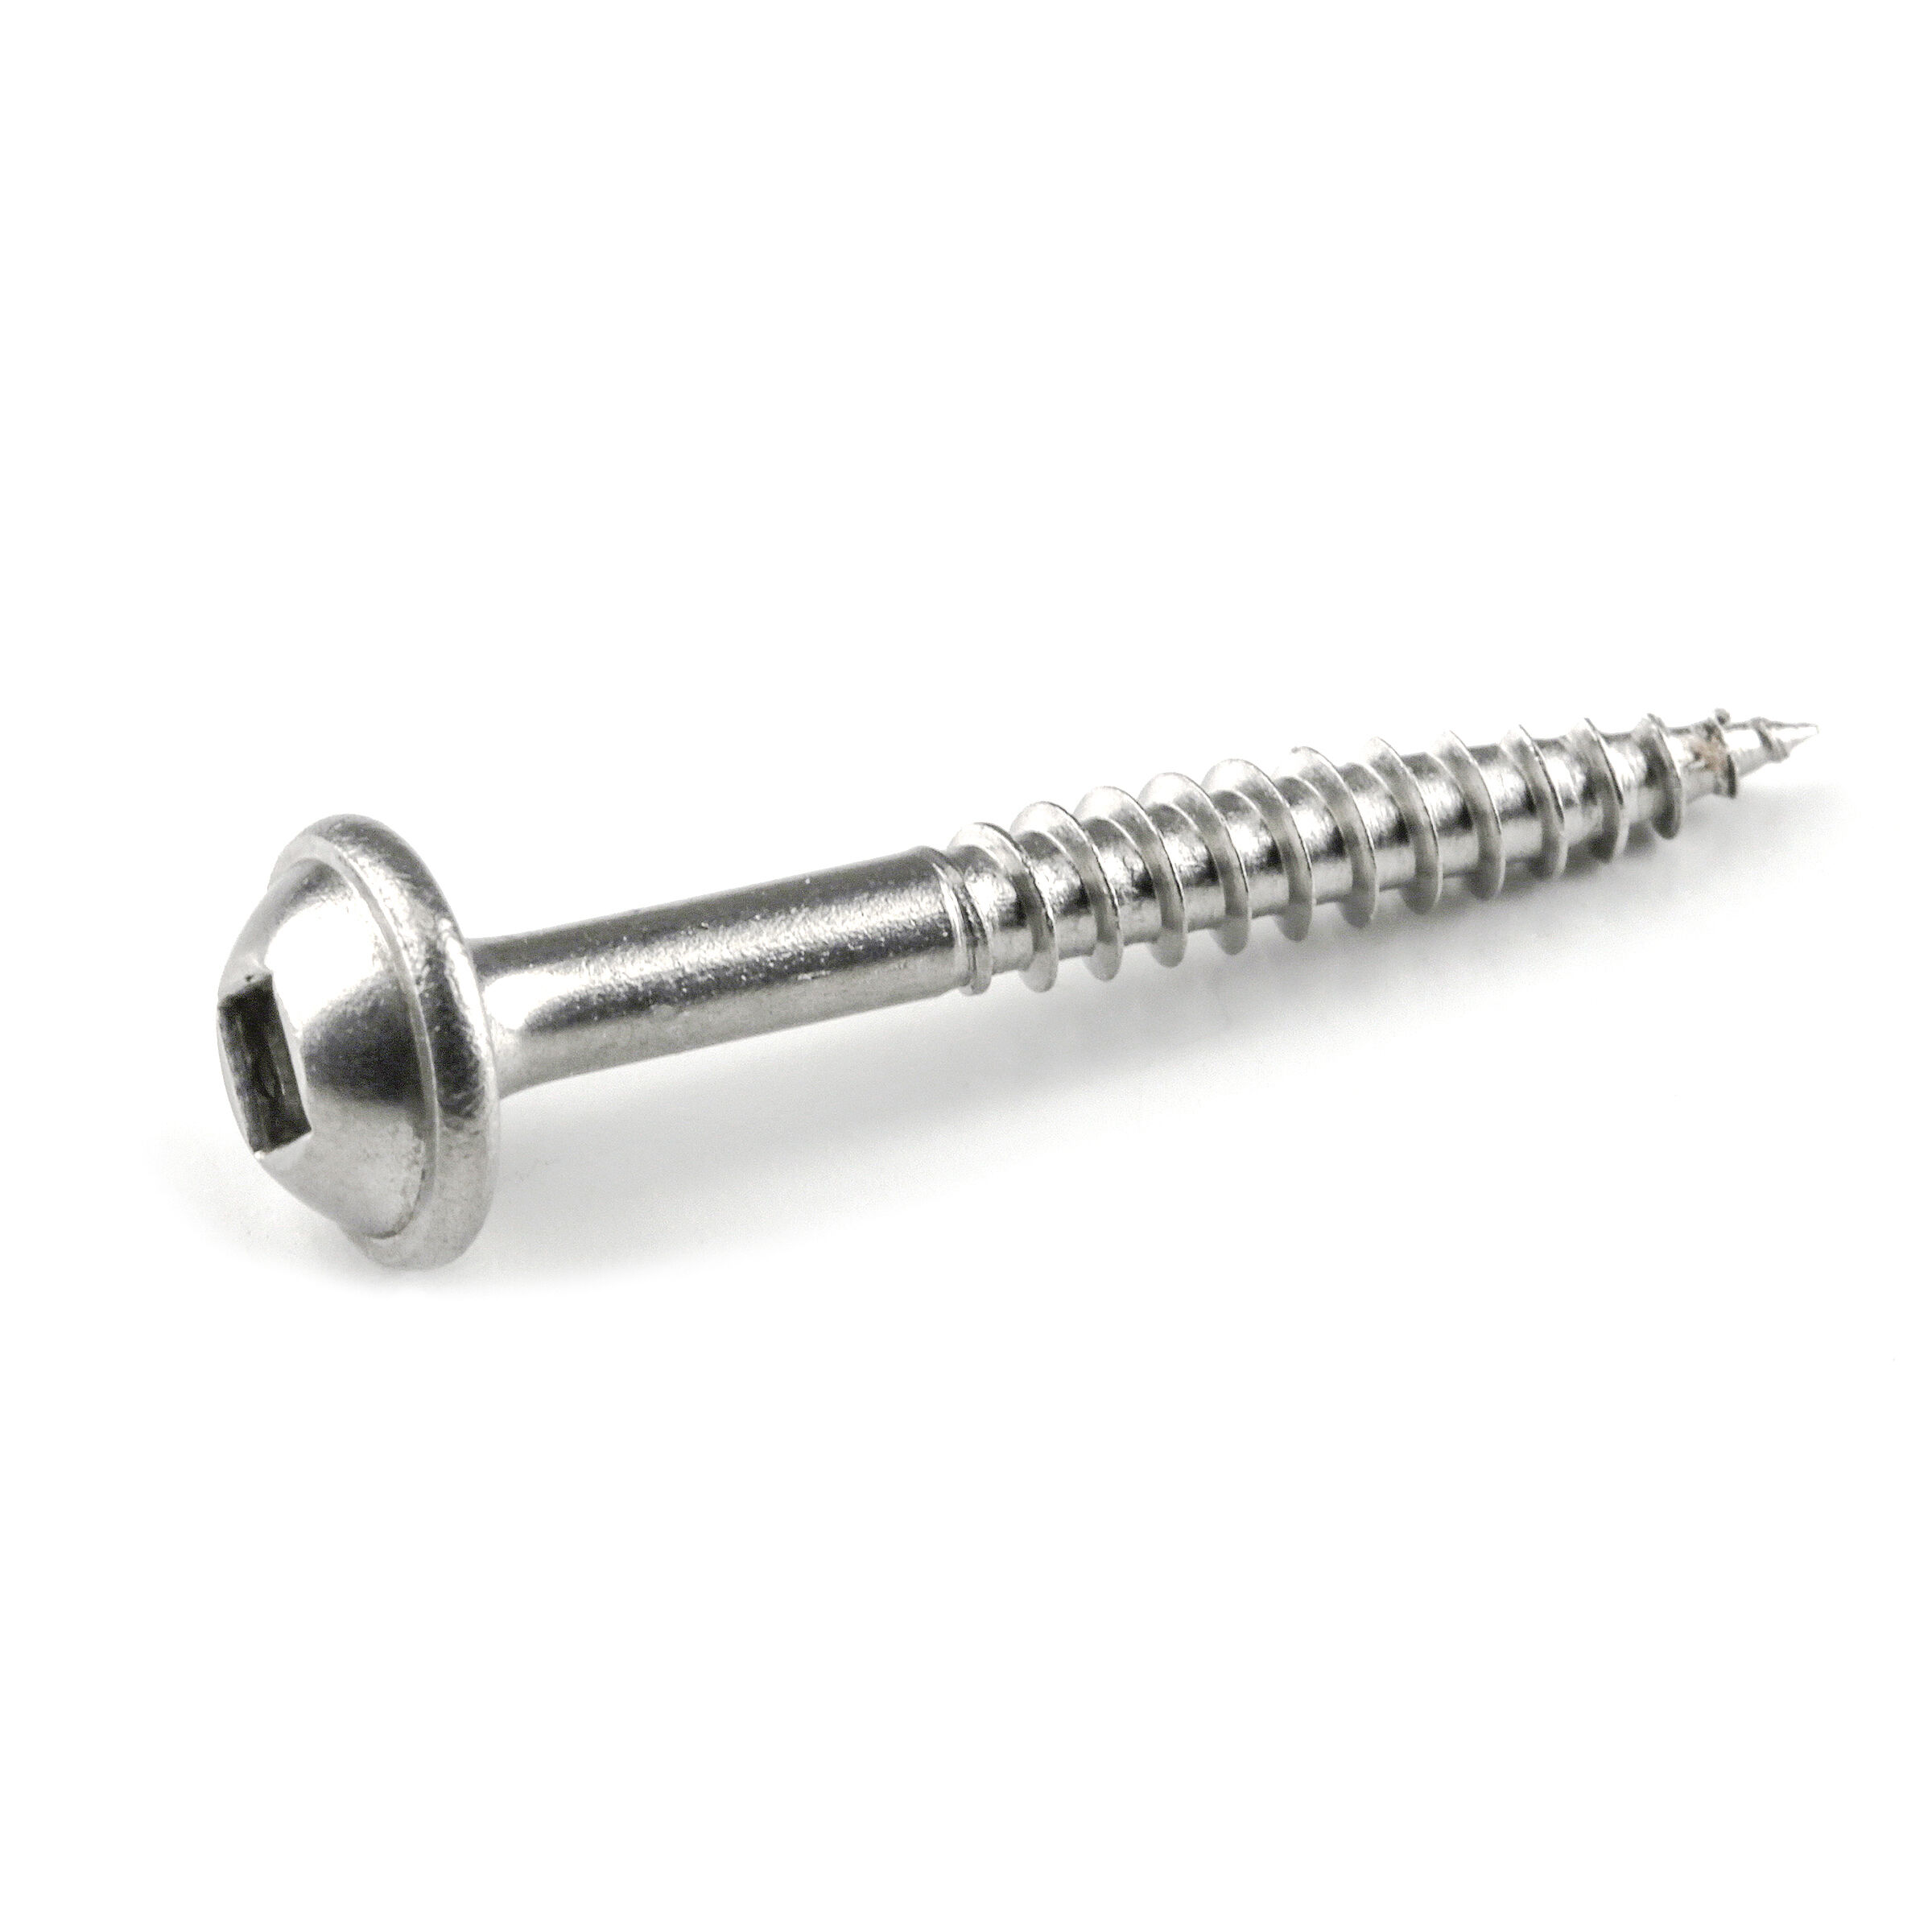 2 1/2-Inch Washer Head #10 Coarse 250 count Kreg SML-C250S5-250 Stainless Steel Pocket Hole Screws